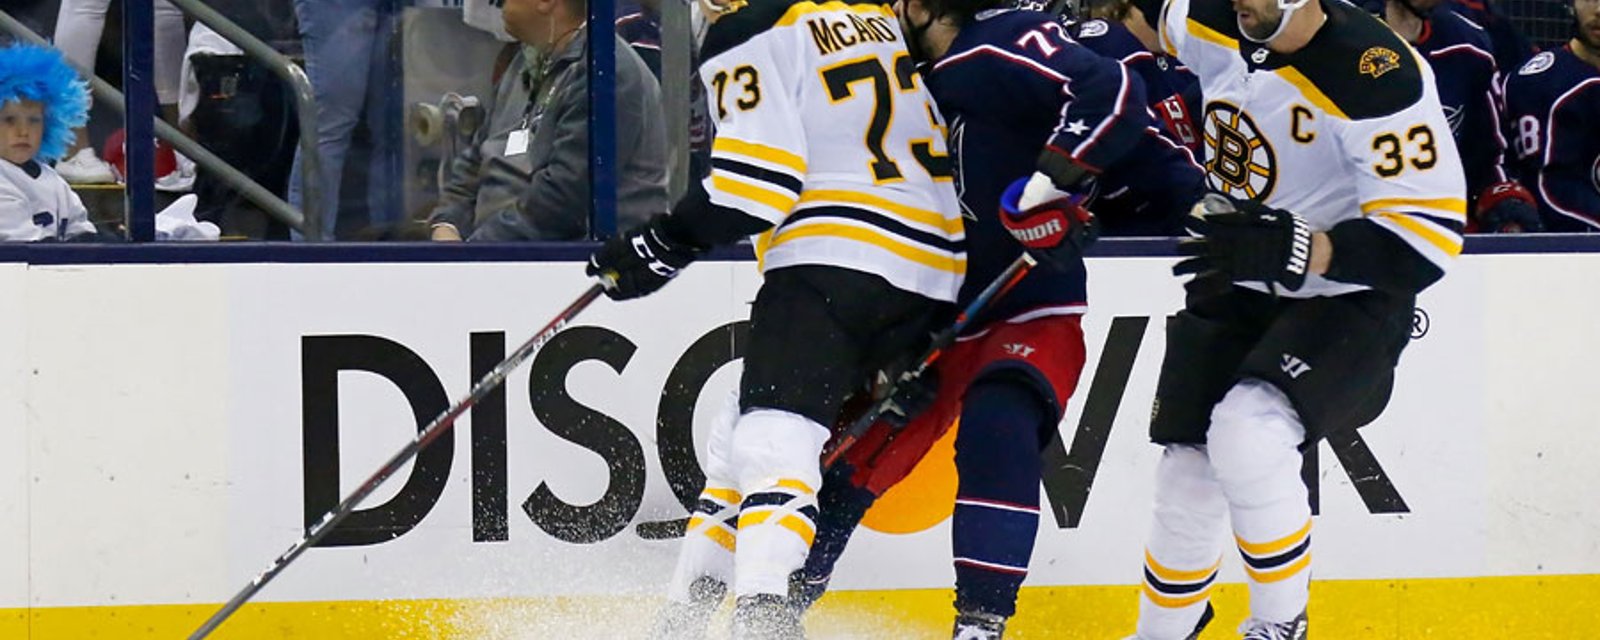 Breaking: NHL hands out ruling on McAvoy’s high hit ahead of the EC finals! 